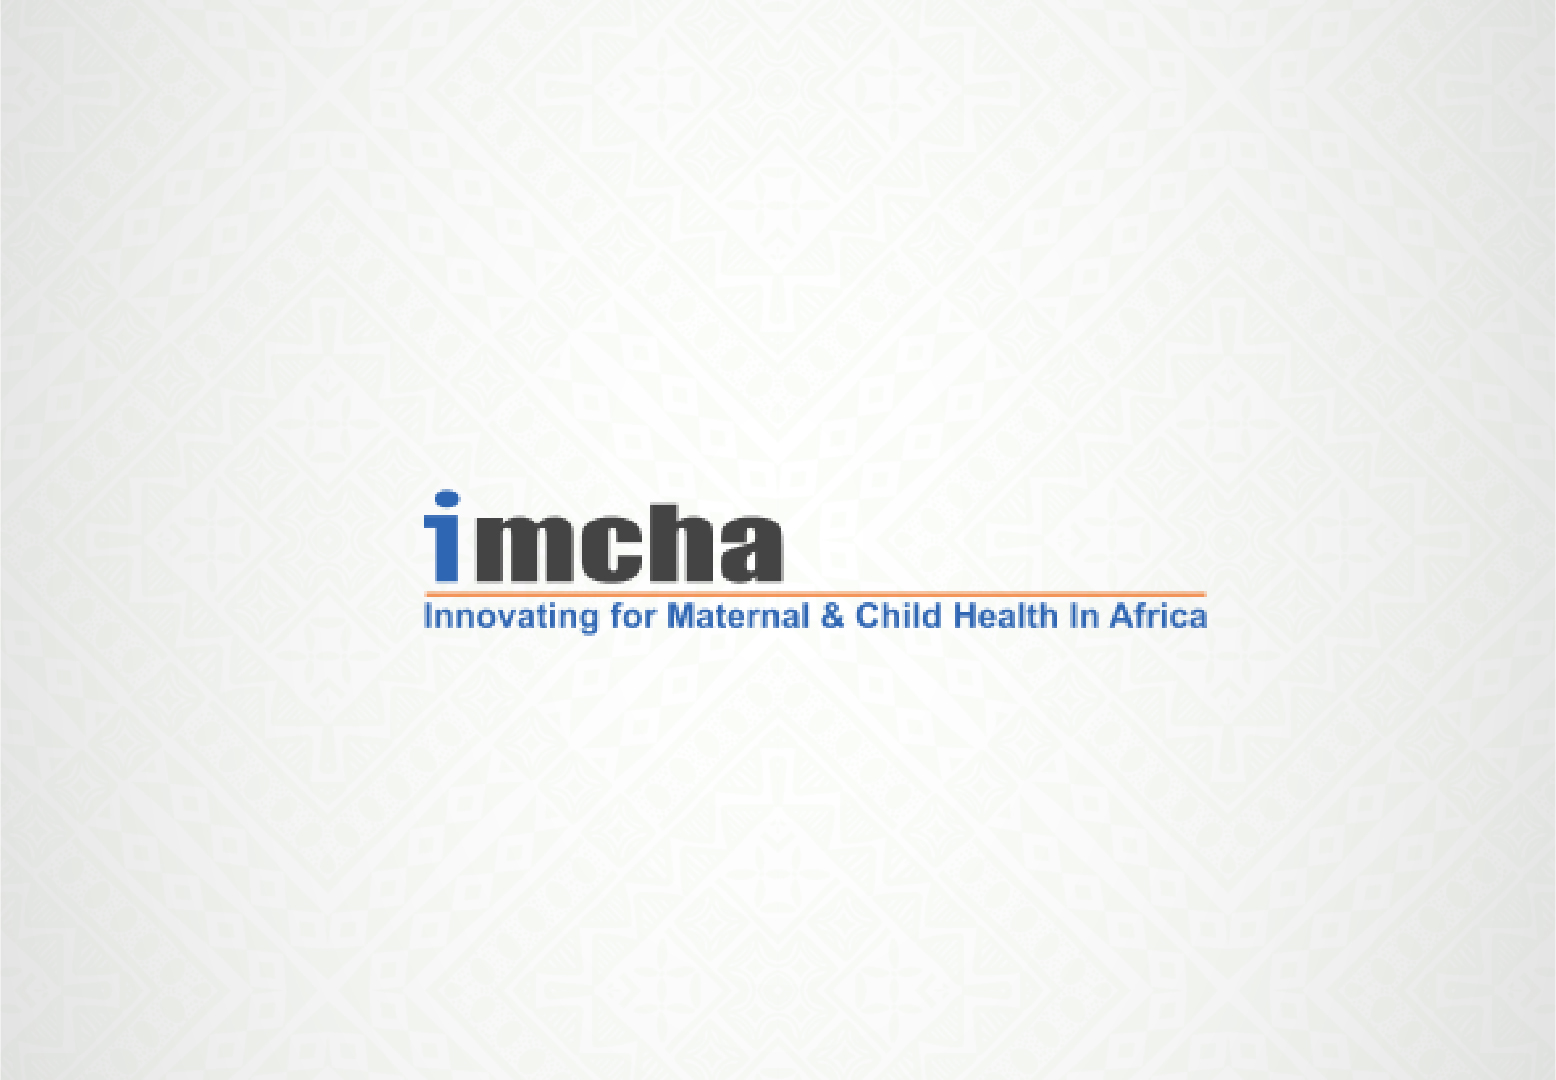 Innovating for Maternal and Child Health in Africa (IMCHA)